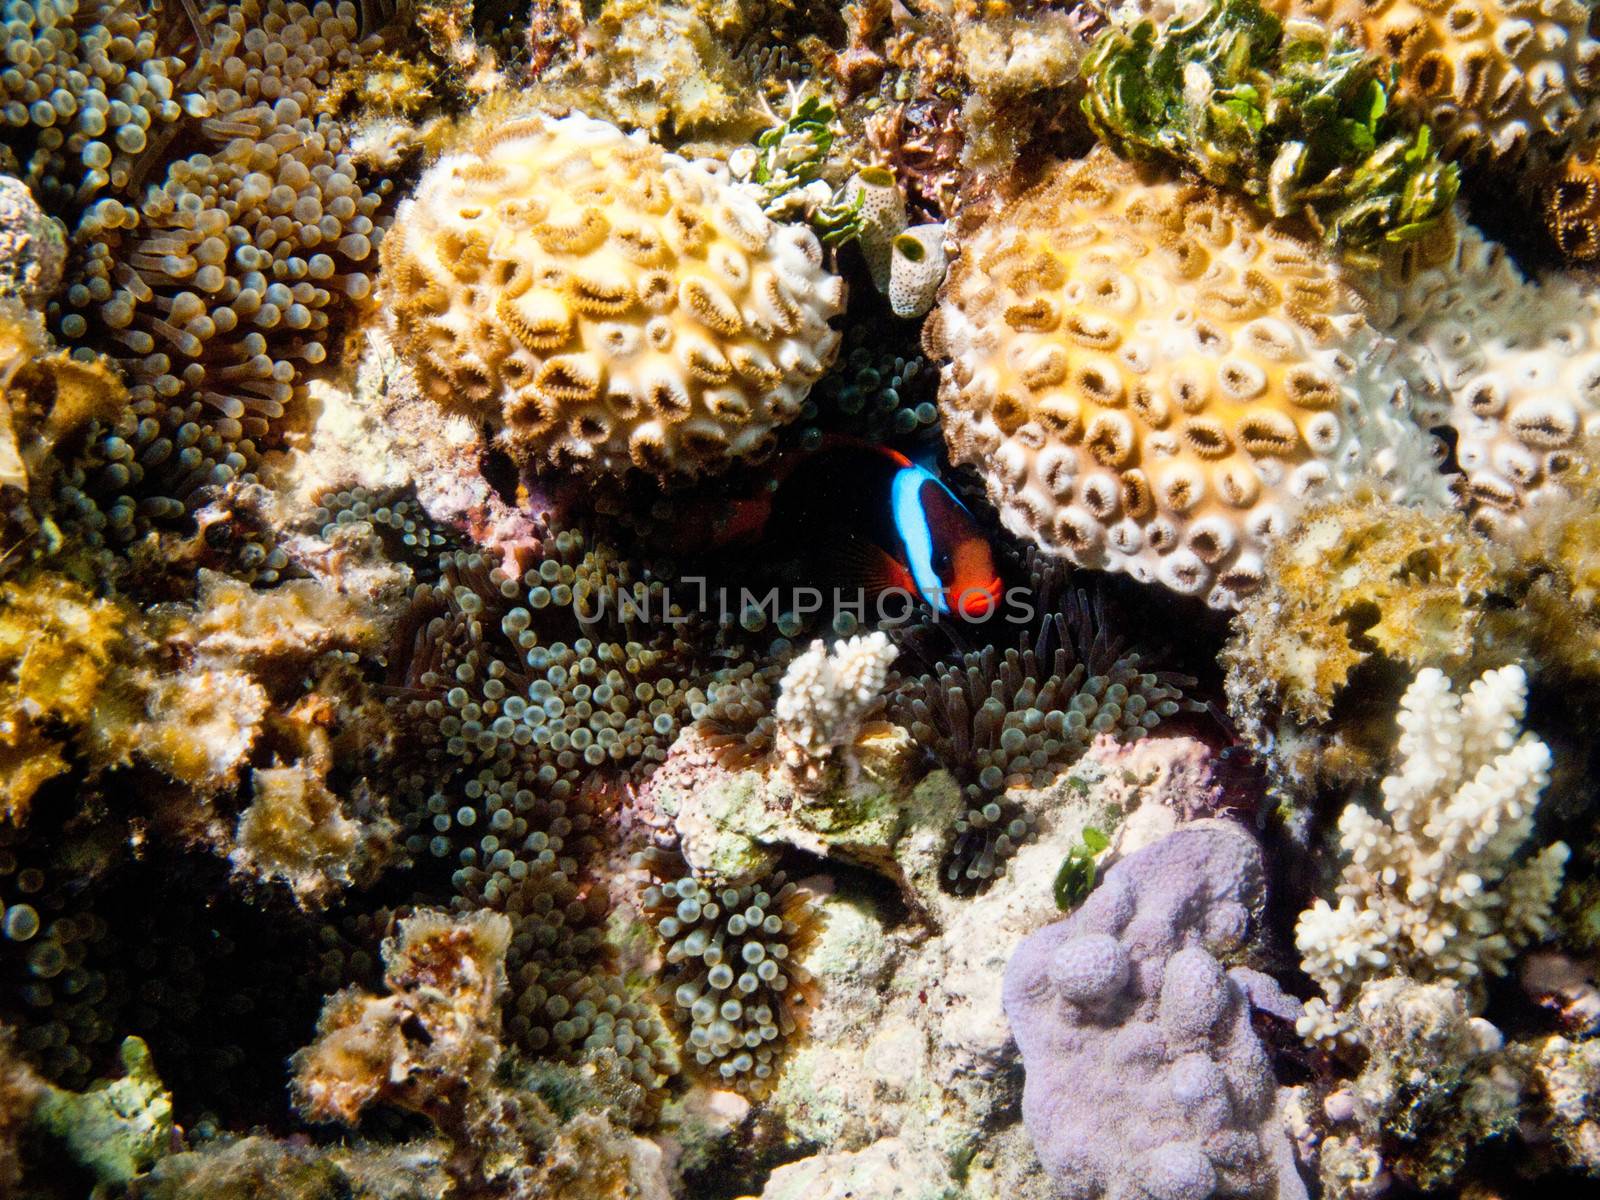 Single clown fish swimming in the ocean amongst some coral reef.